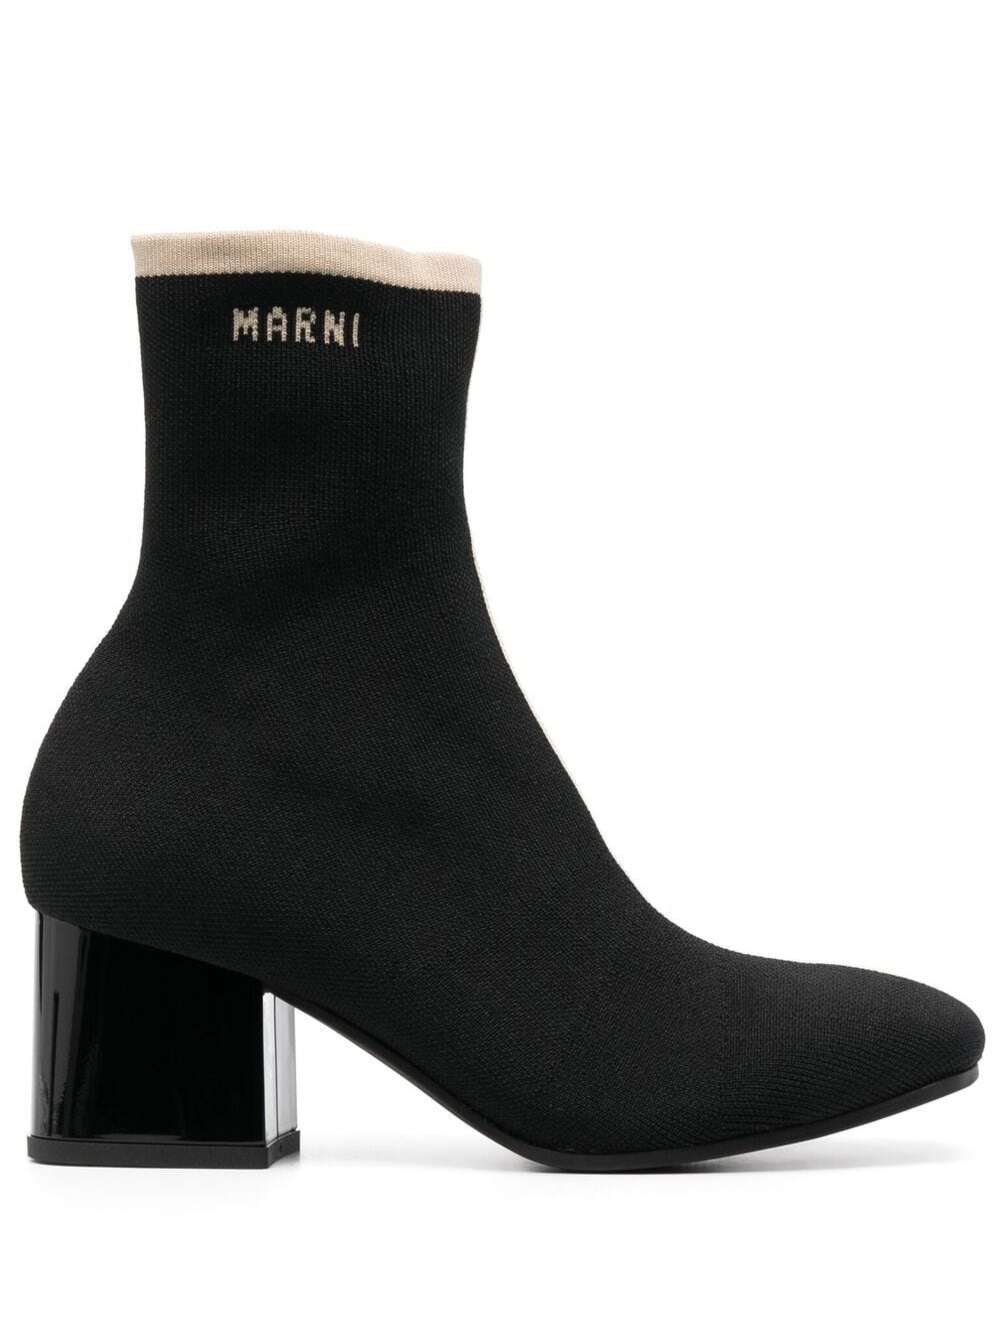 Black Ankle Boot In Leather With Medium And Wide Heel Ecru-colored Details